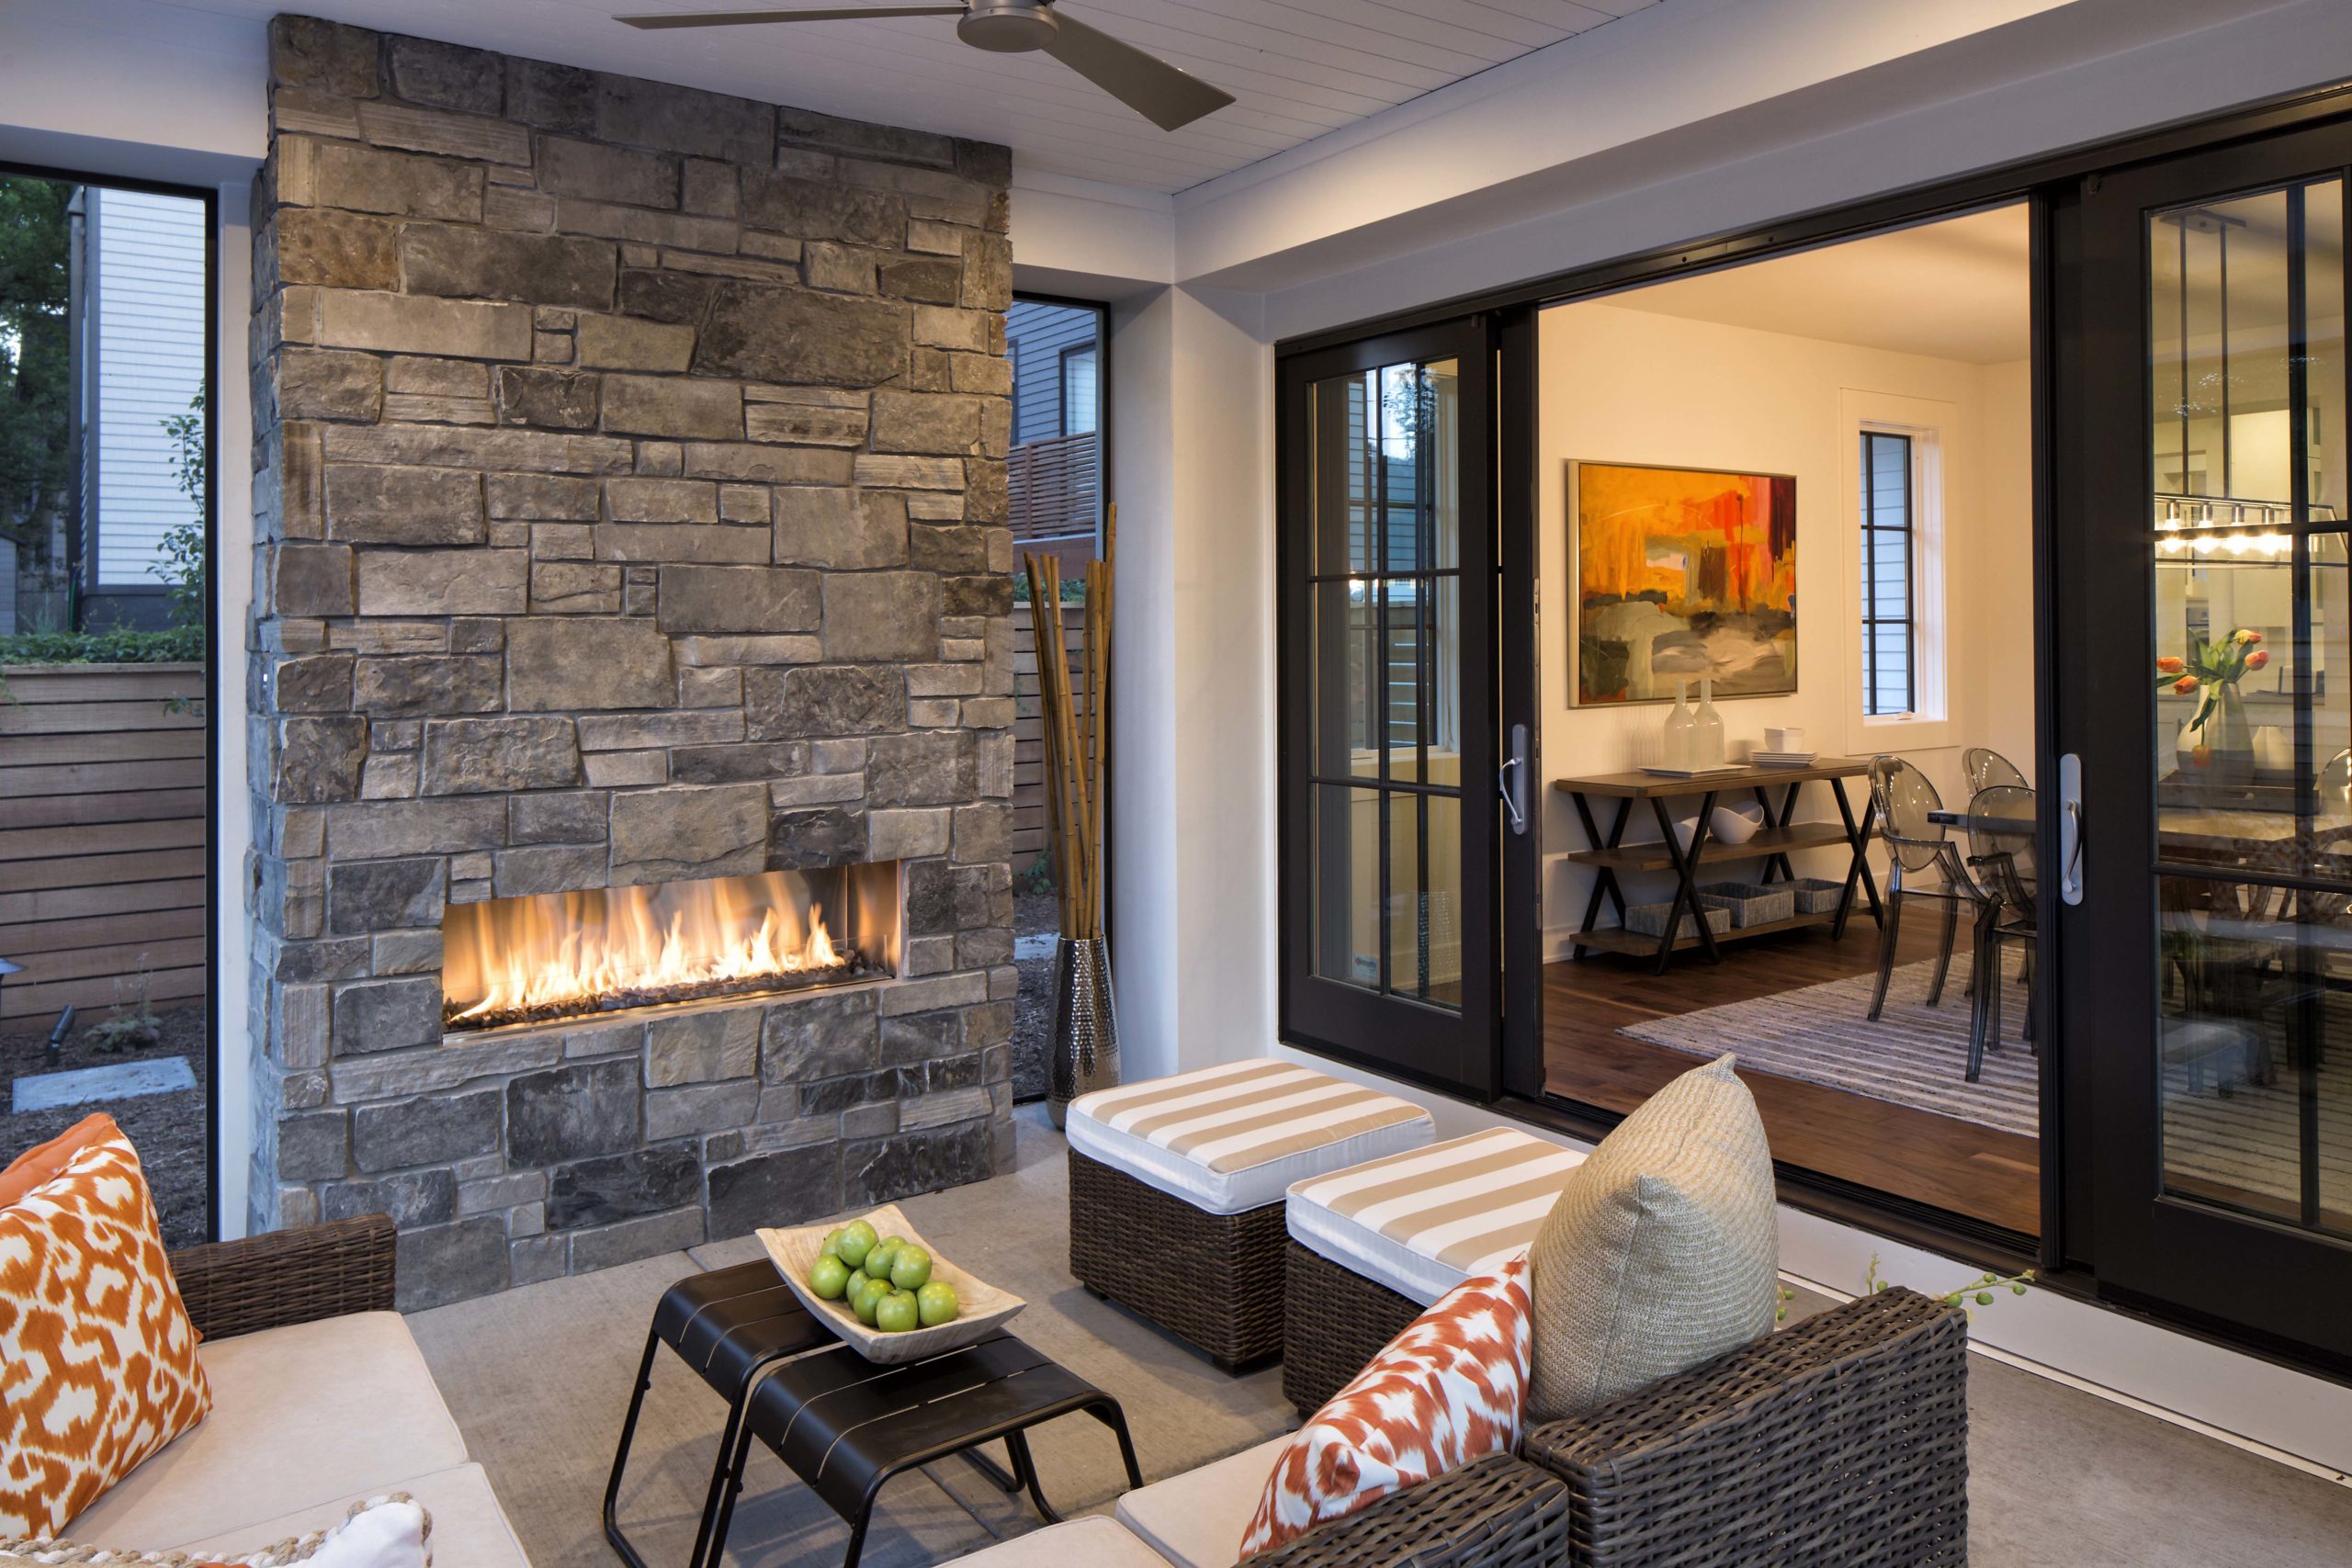 A living room with a stone fireplace and sliding glass doors.